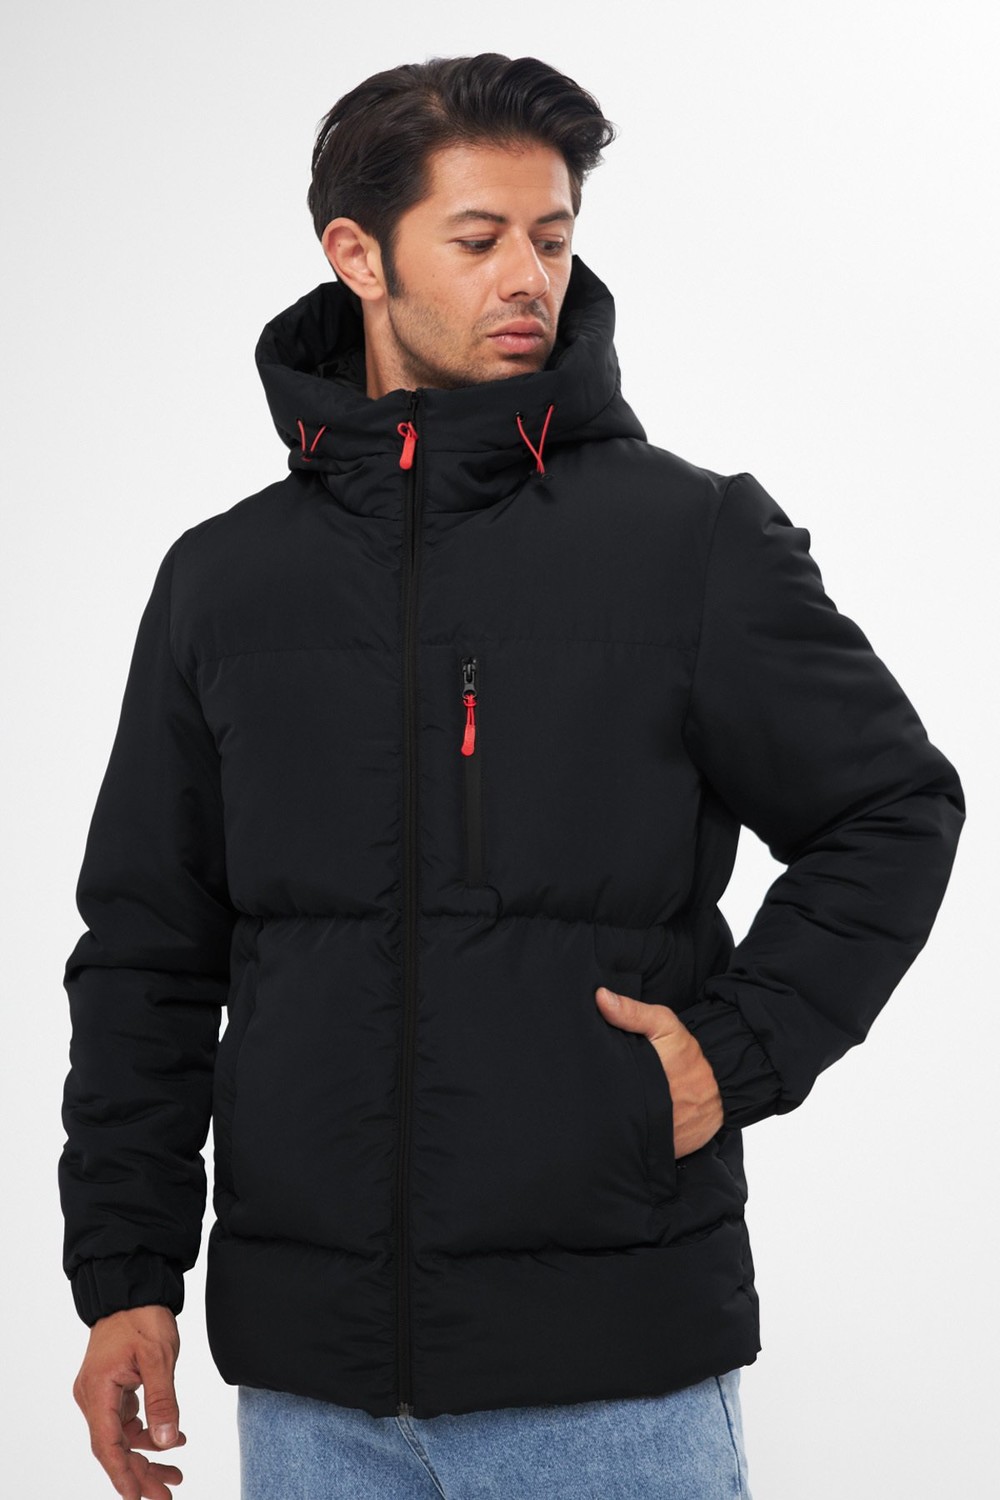 D1fference Men's Black Thick Lined Inflatable Winter Coat with a Hooded Waterproof and Windproof.